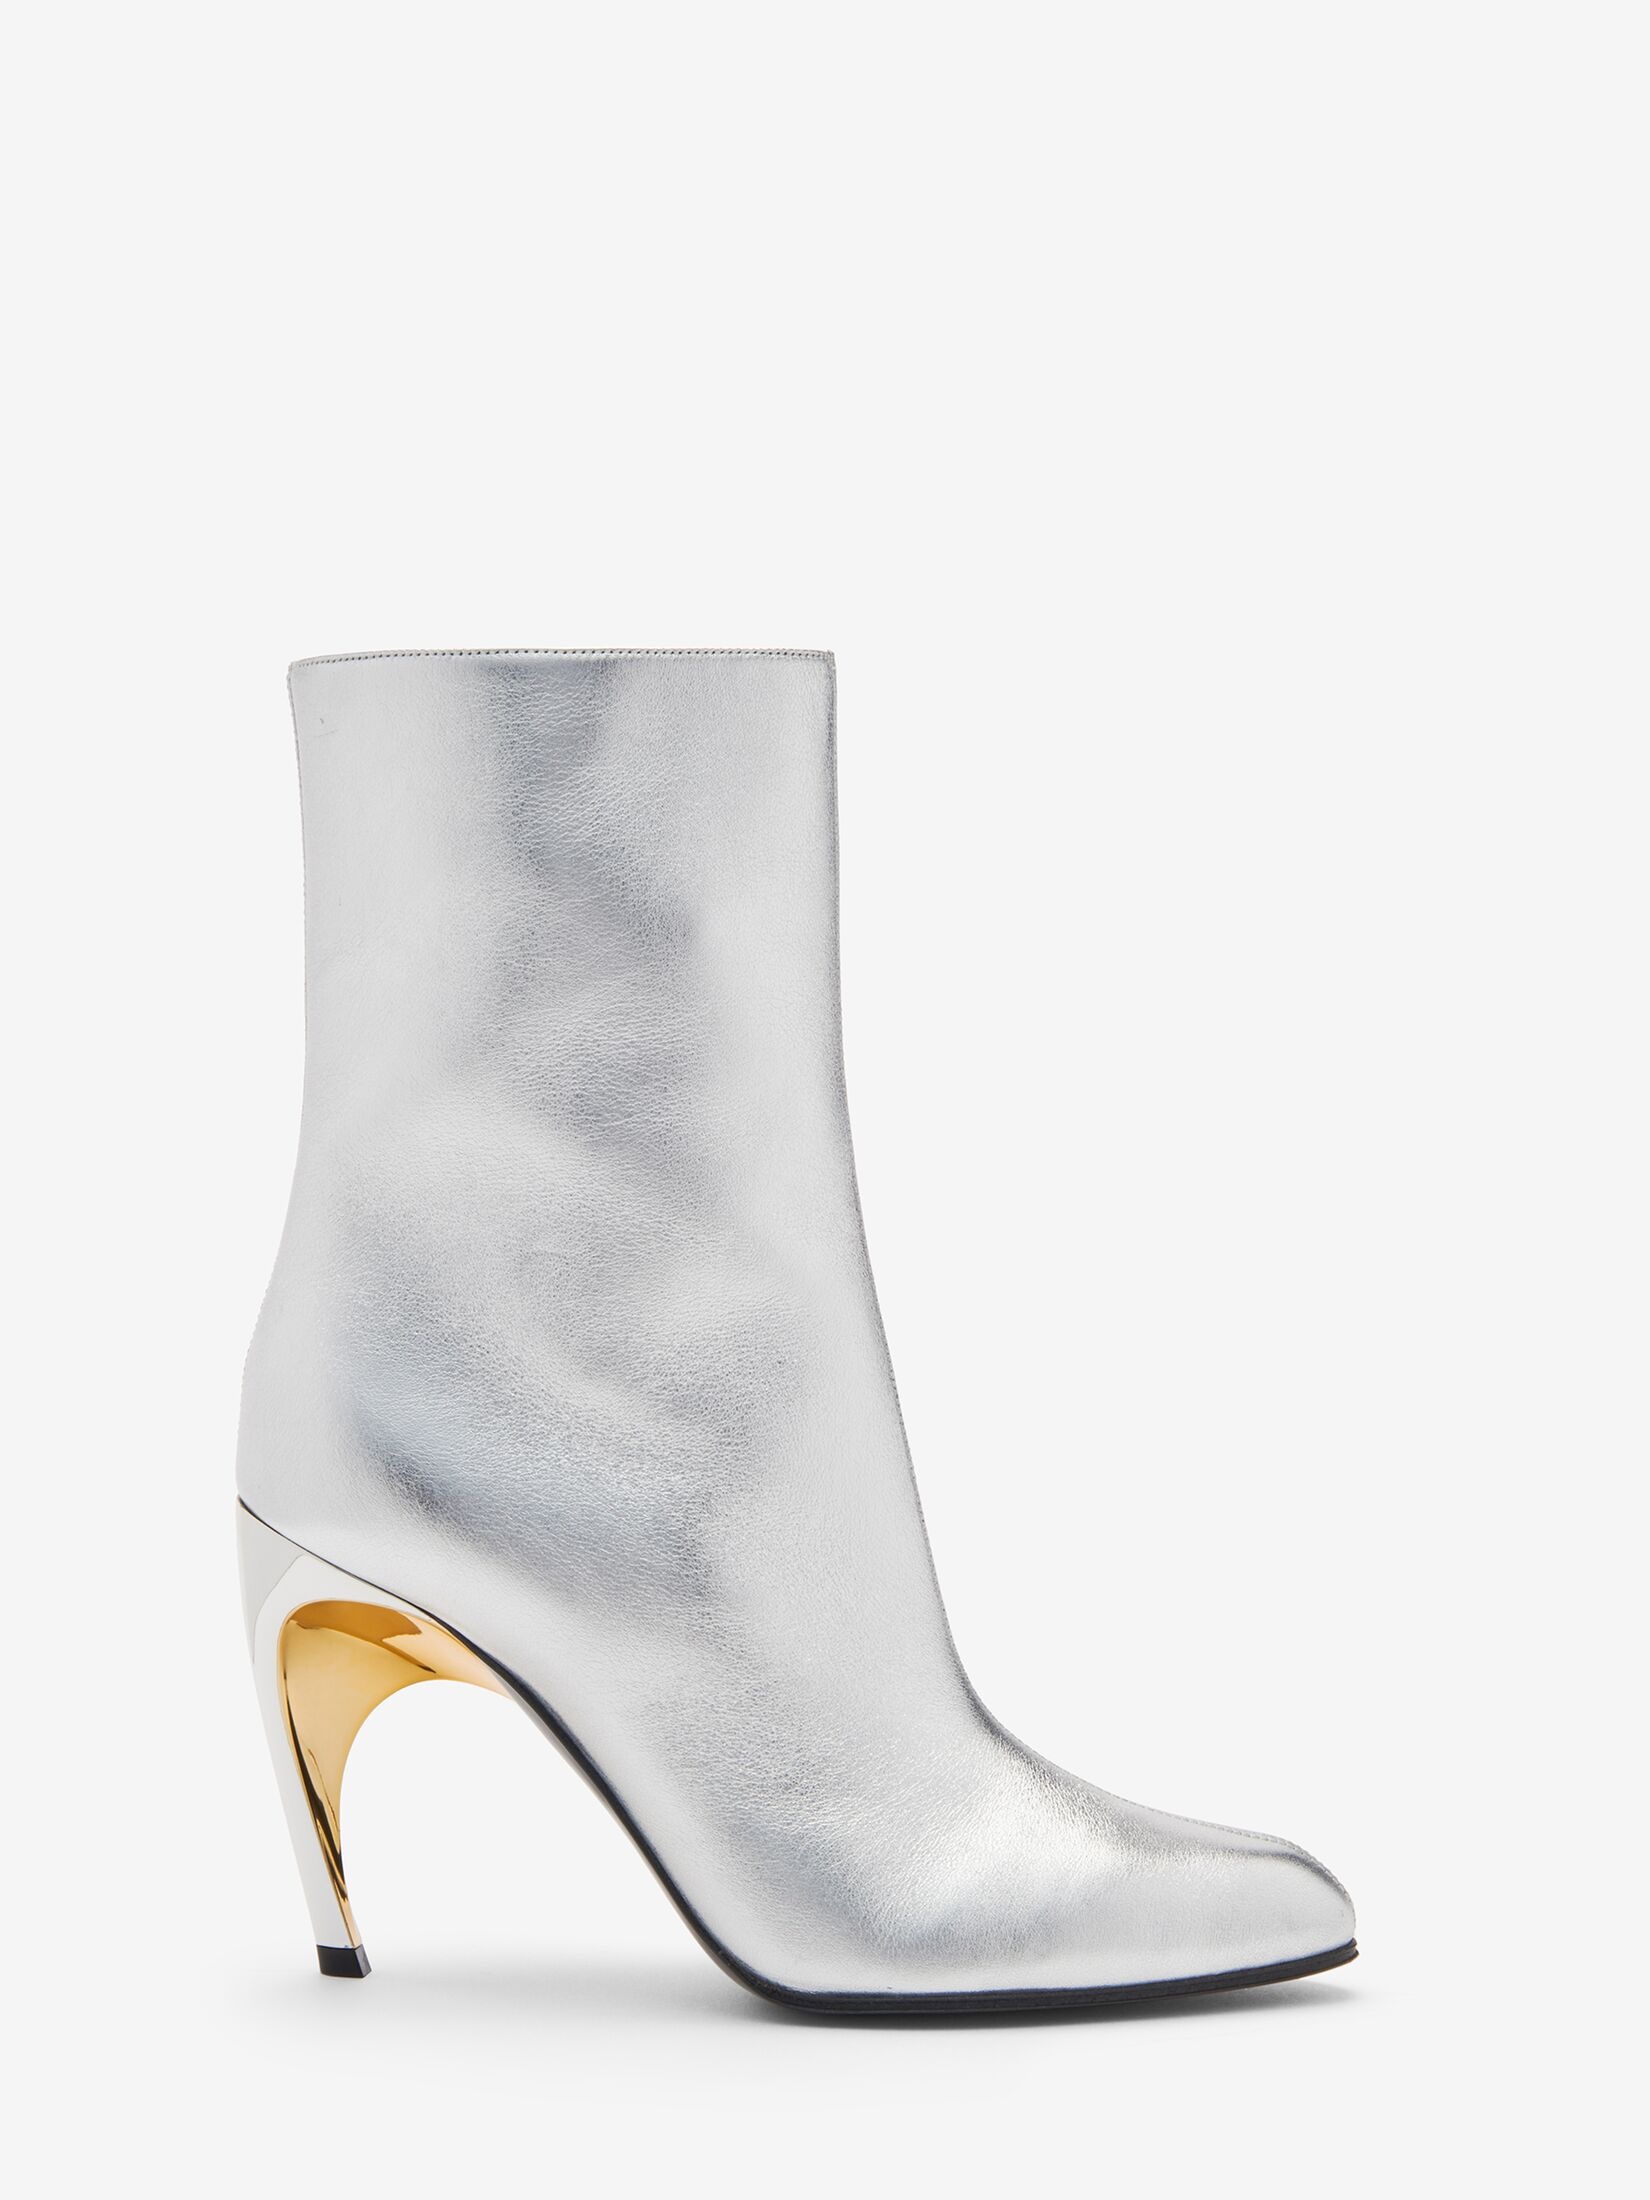 Women's Armadillo Ankle Boot in Silver/gold - 1